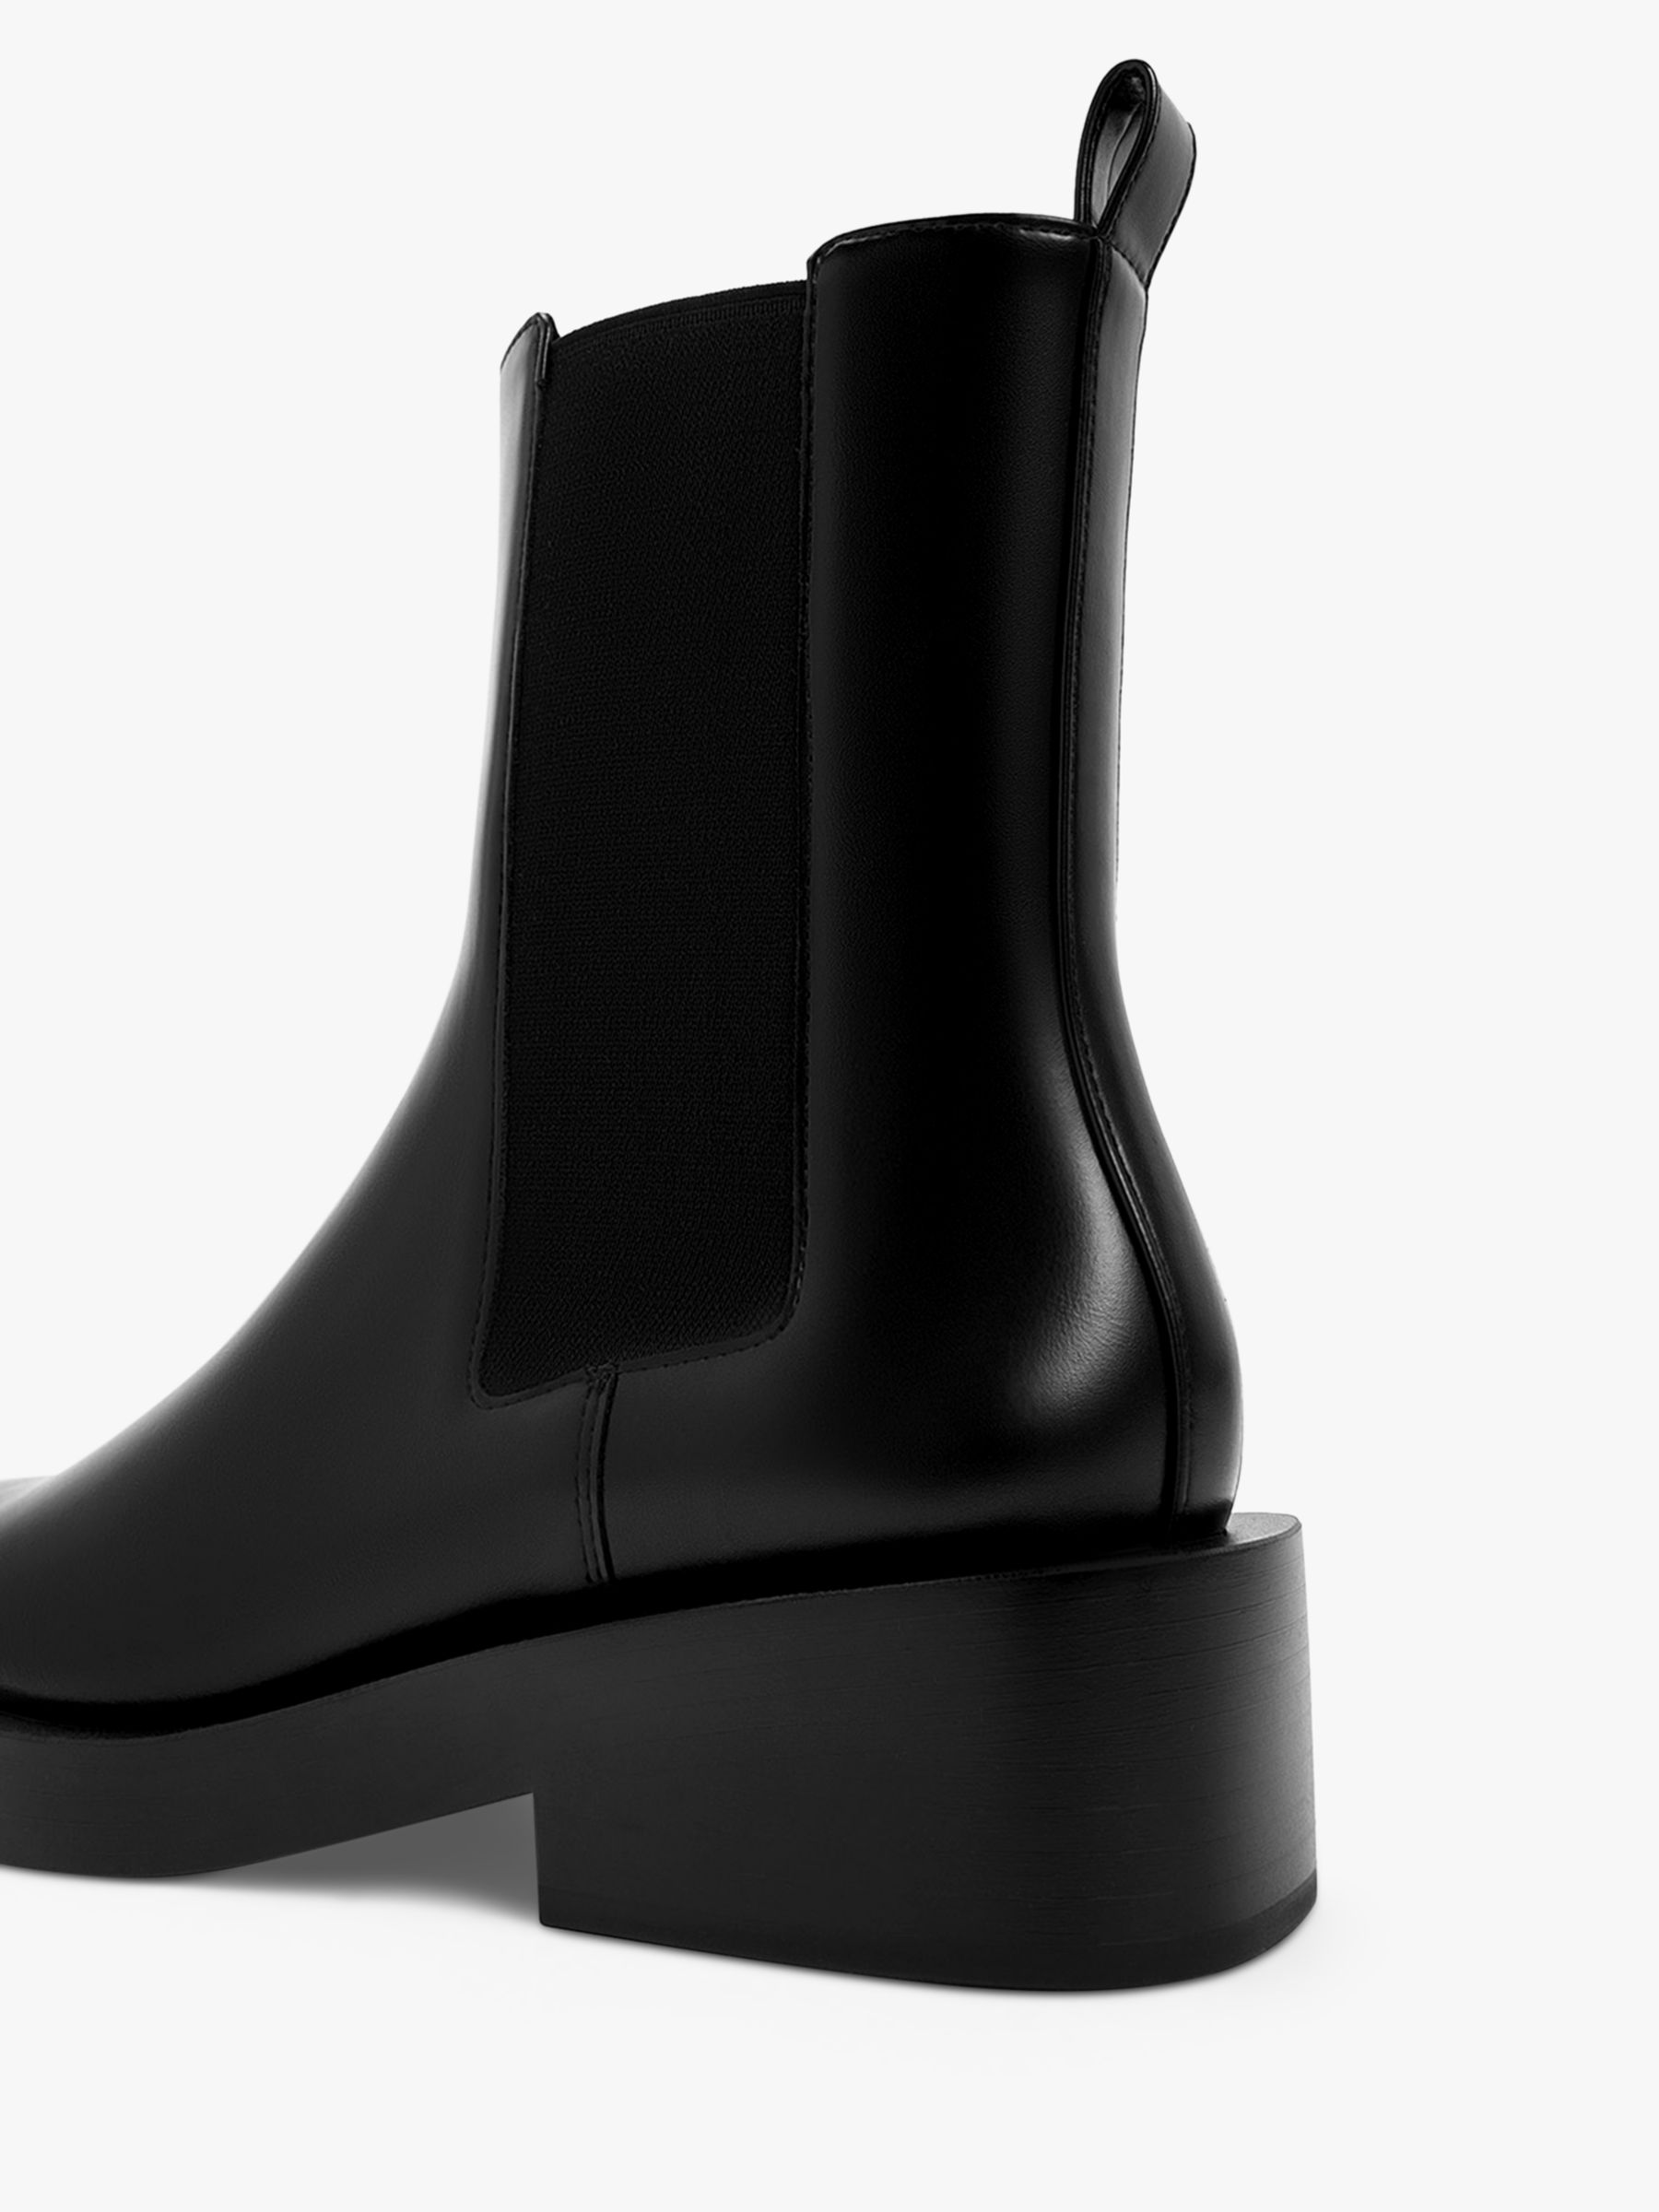 CHARLES & KEITH Chelsea Boots, Black at John Lewis & Partners